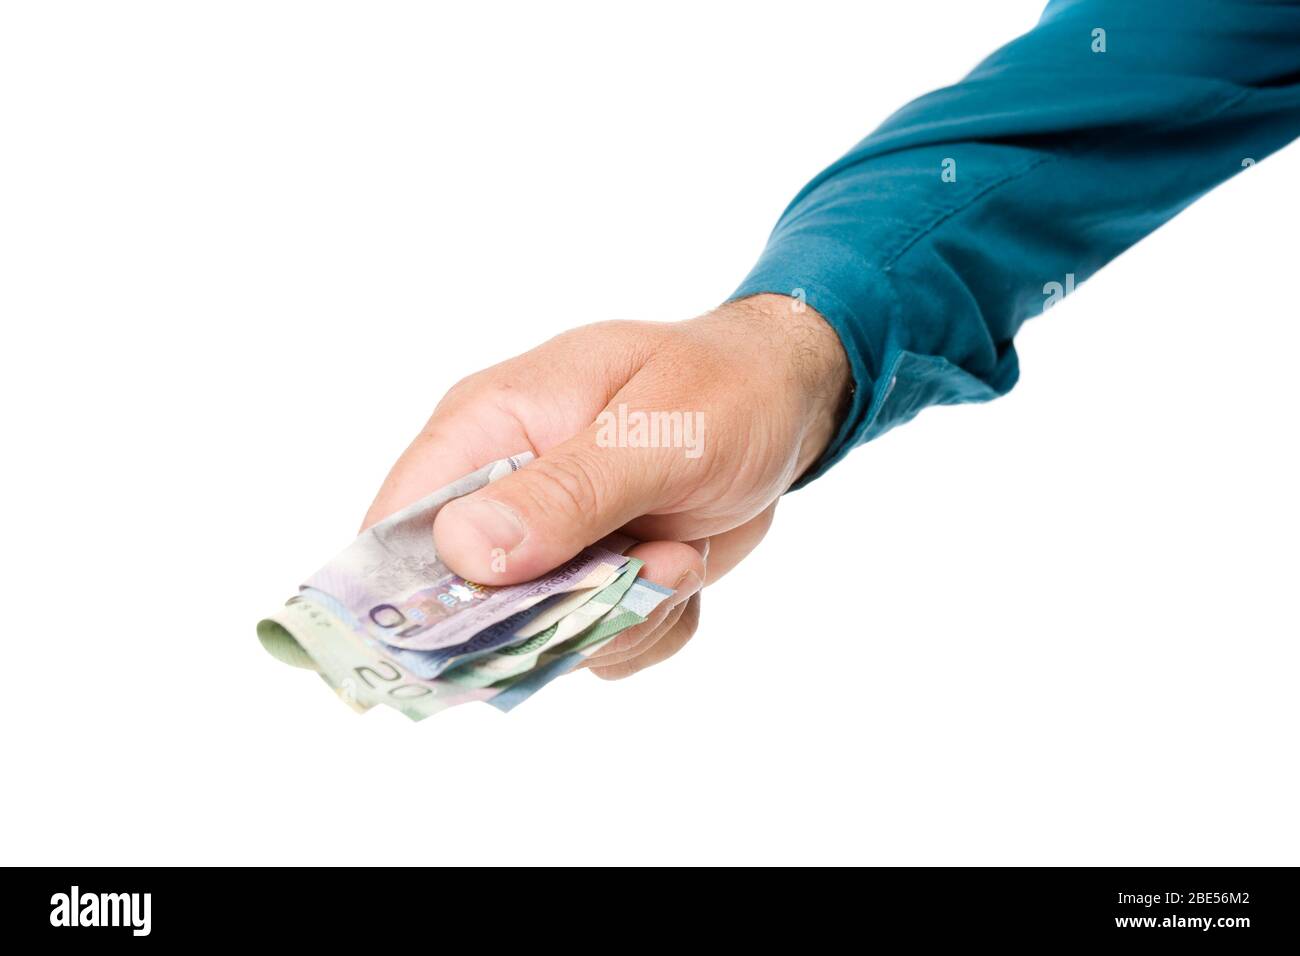 A hand extended out to give money, on white. Stock Photo